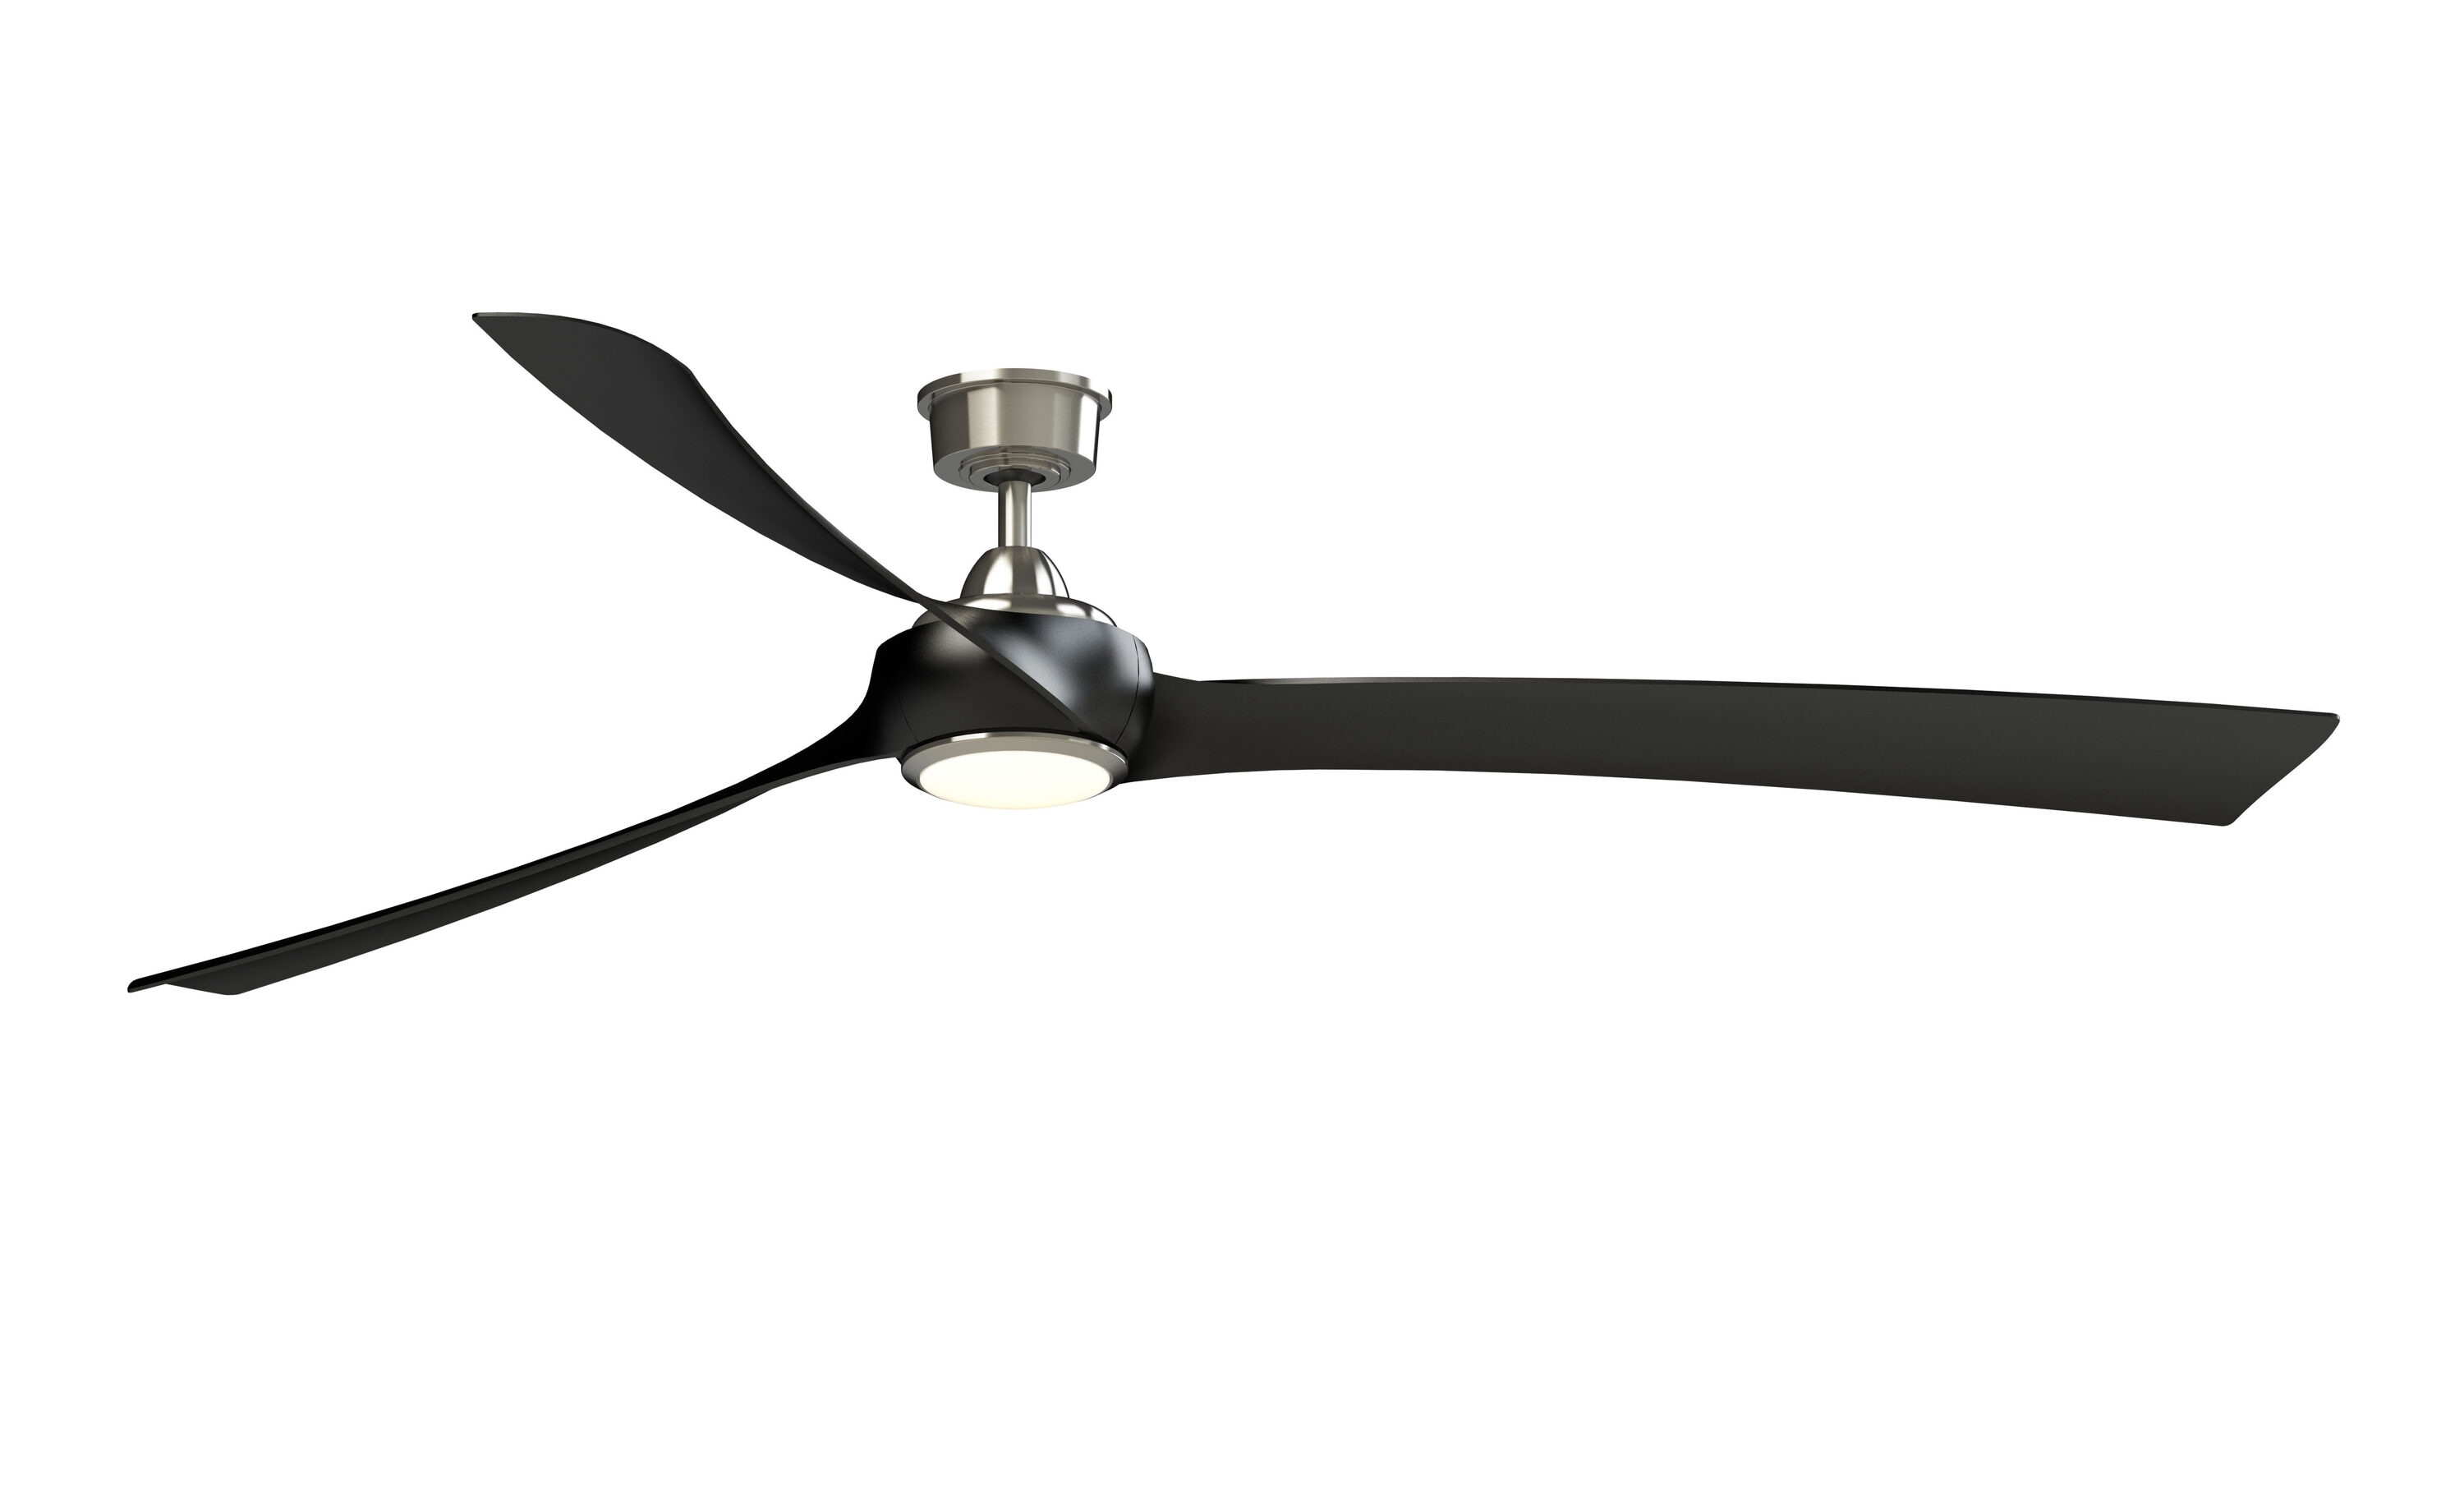 Wrap Custom 84-in Brushed Nickel LED Indoor/Outdoor Smart Ceiling Fan with Light Remote (3-Blade) | - Fanimation FPD8531BN-84BL-LK